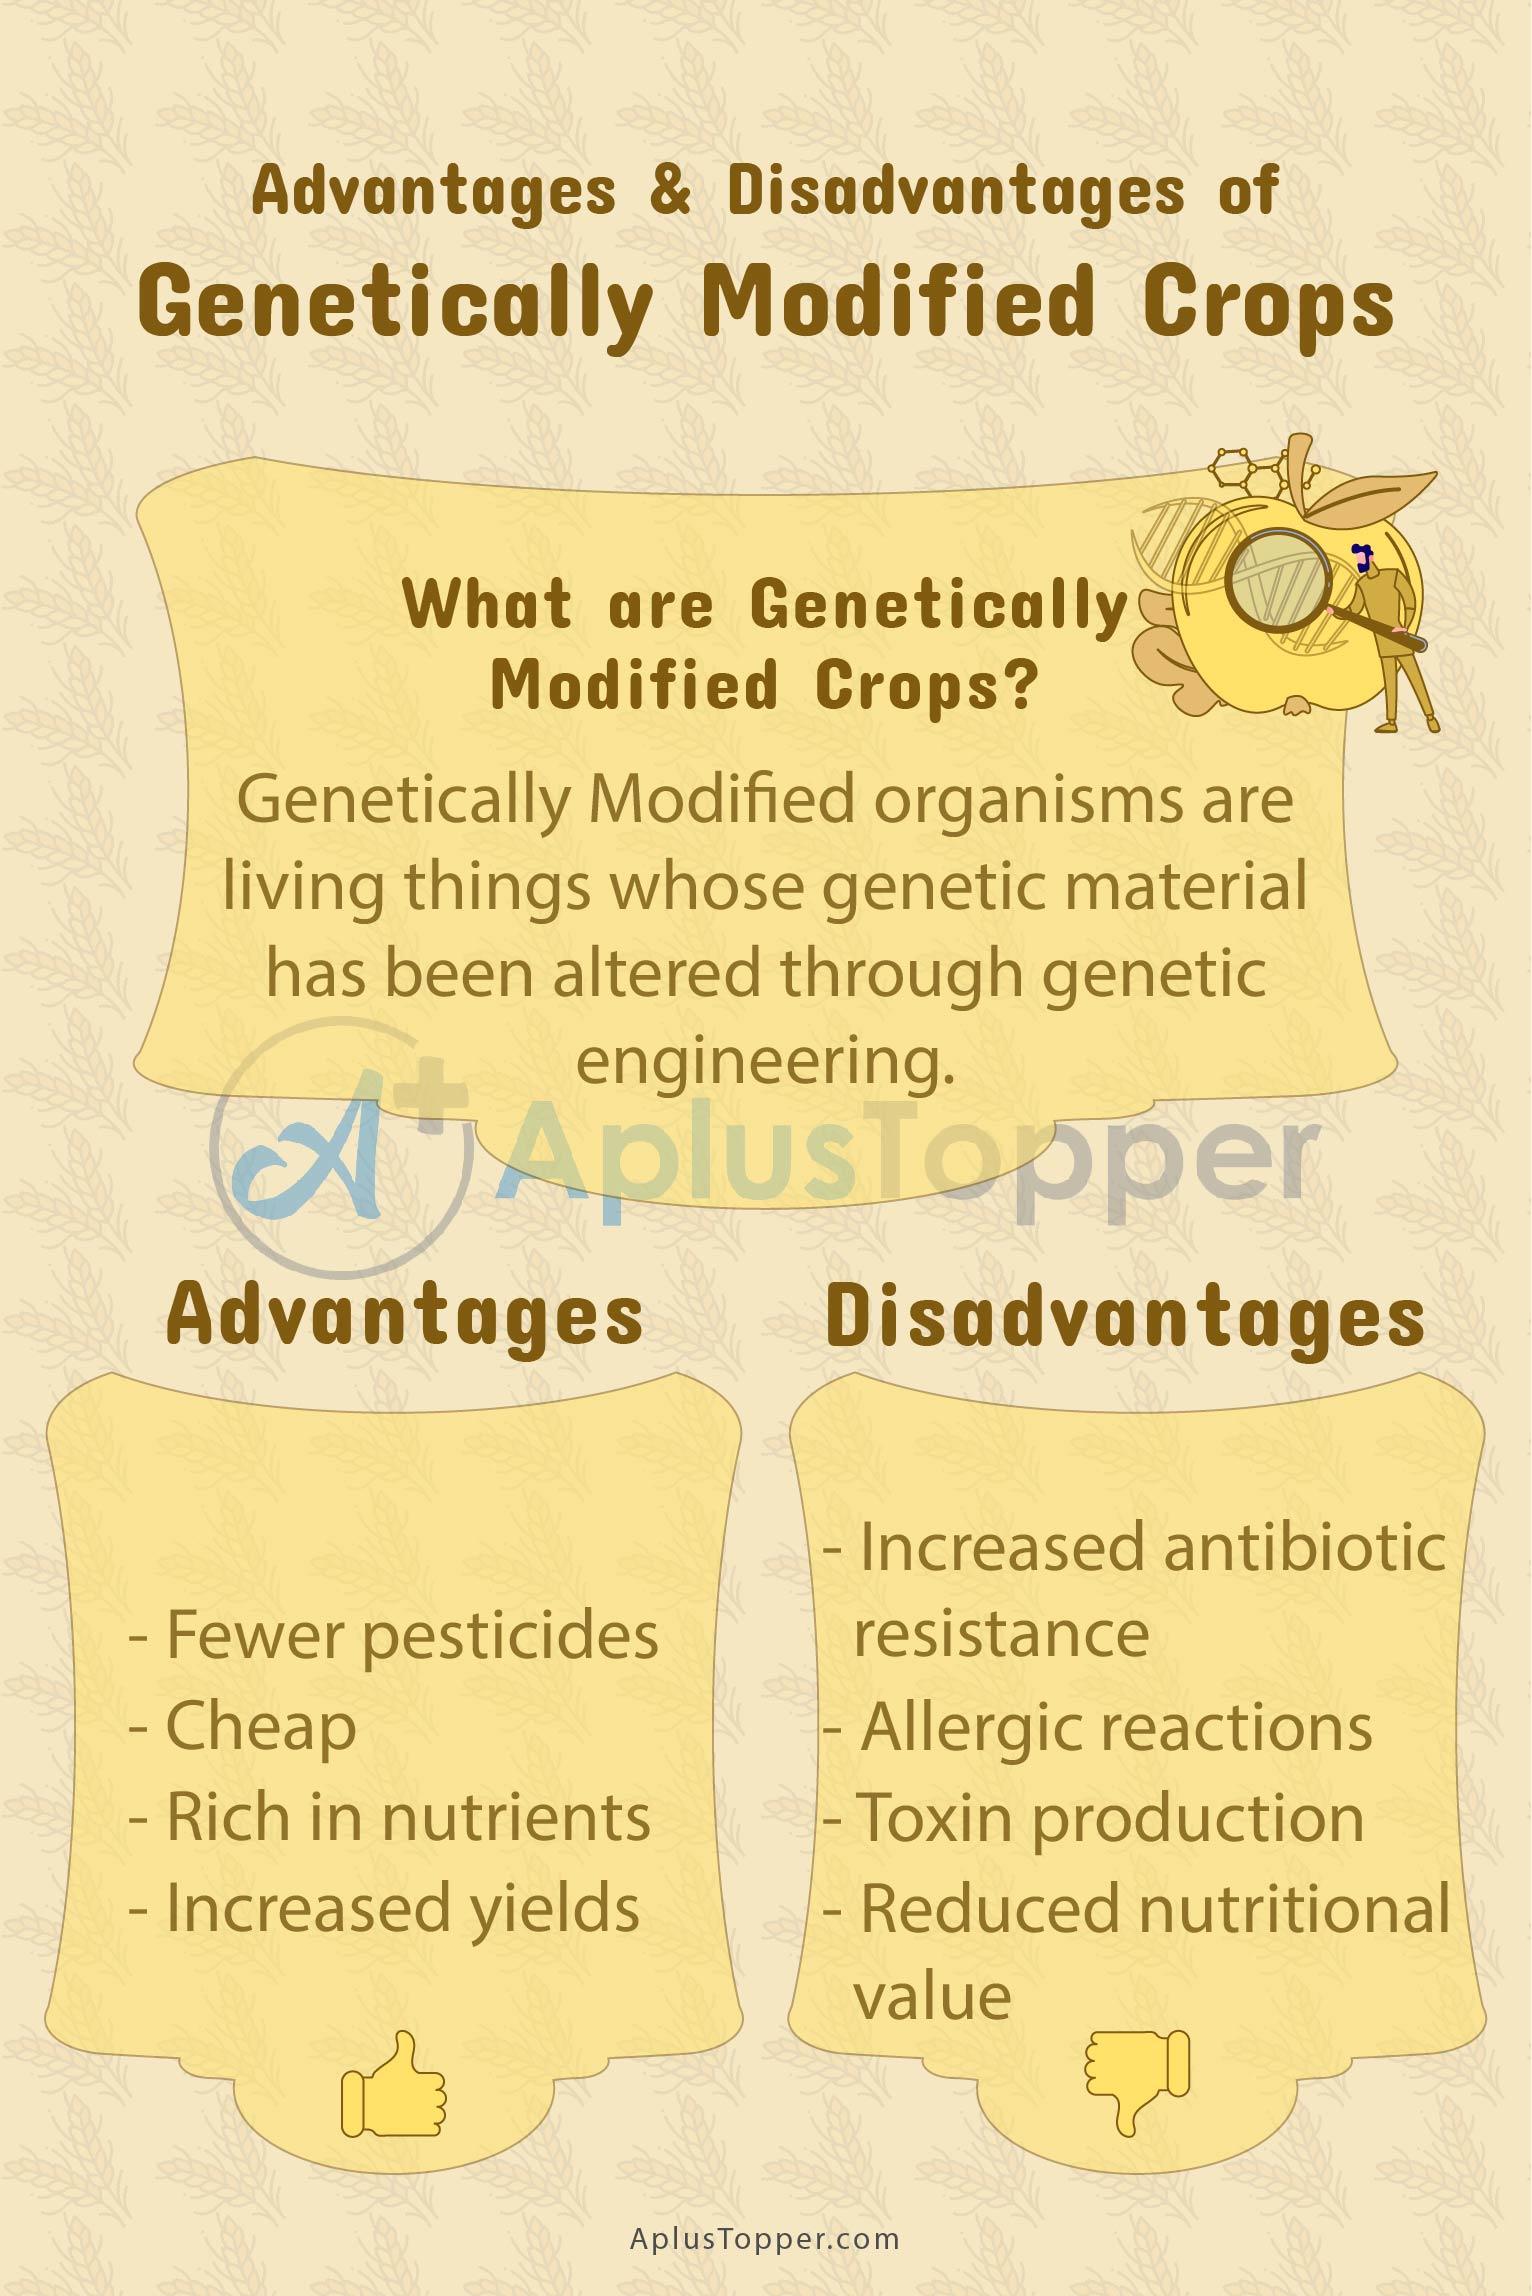 Genetically Modified Crops Advantages and Disadvantages | Advantages and  Disadvantages of GM Crops - A Plus Topper